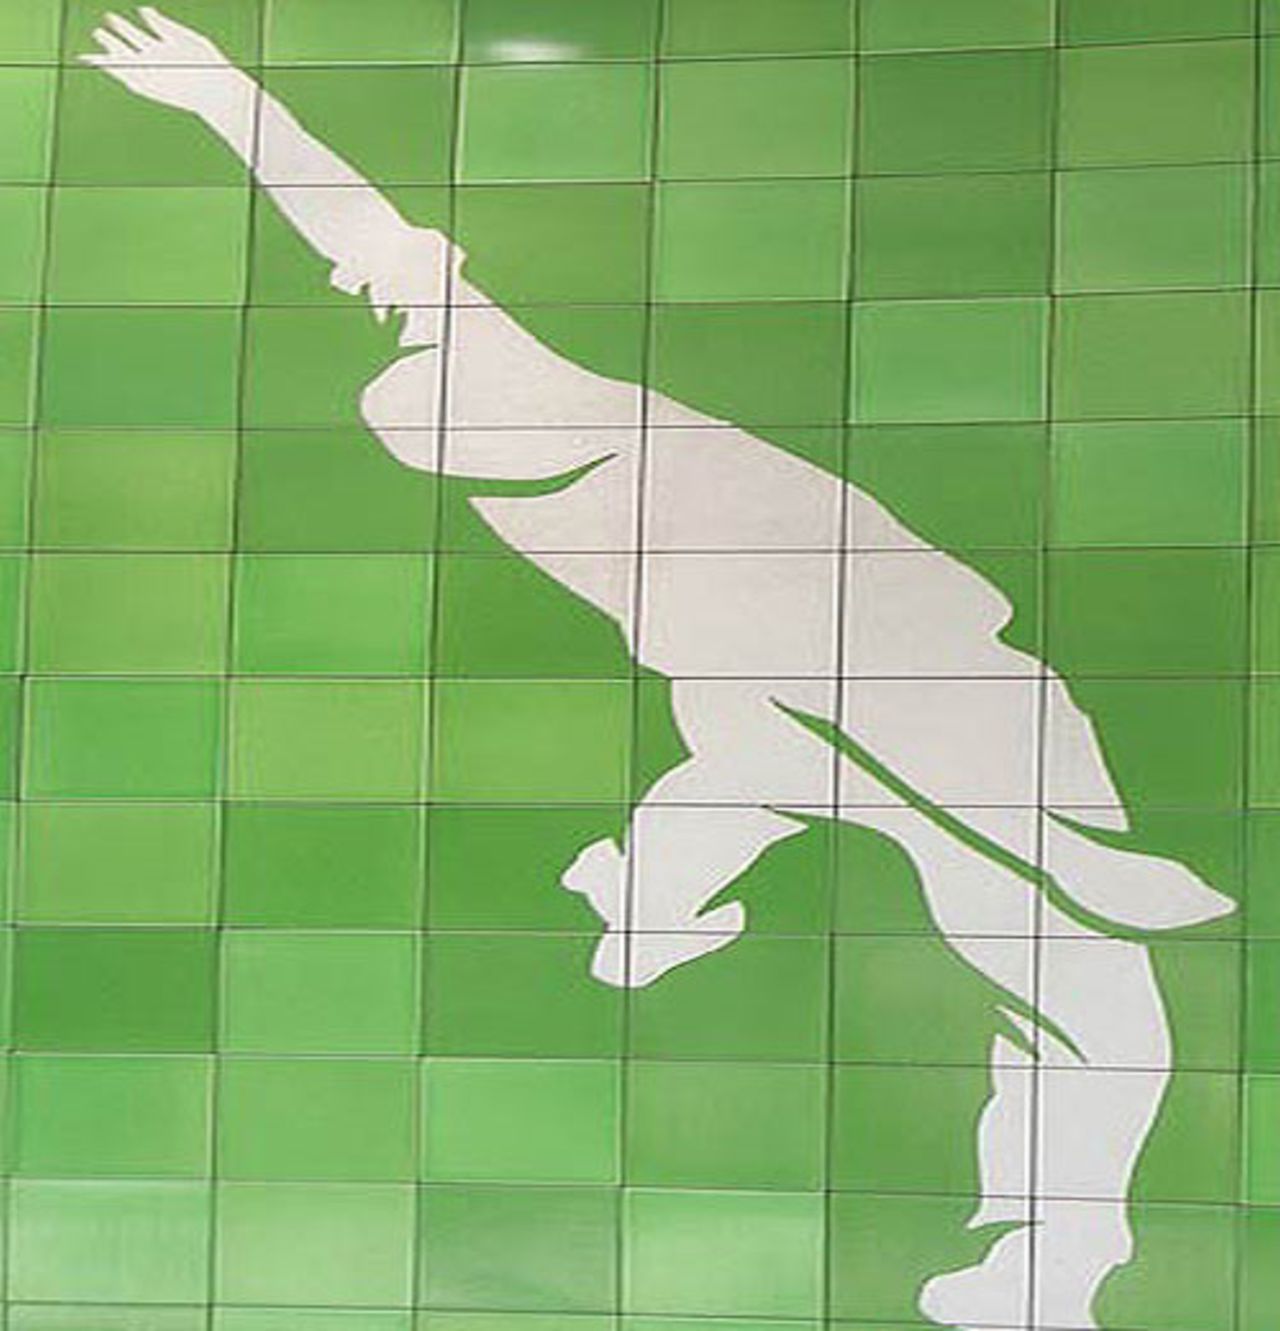 Painting of Gordon Rorke's bowling action, Oval tube station, London, August 7, 2007